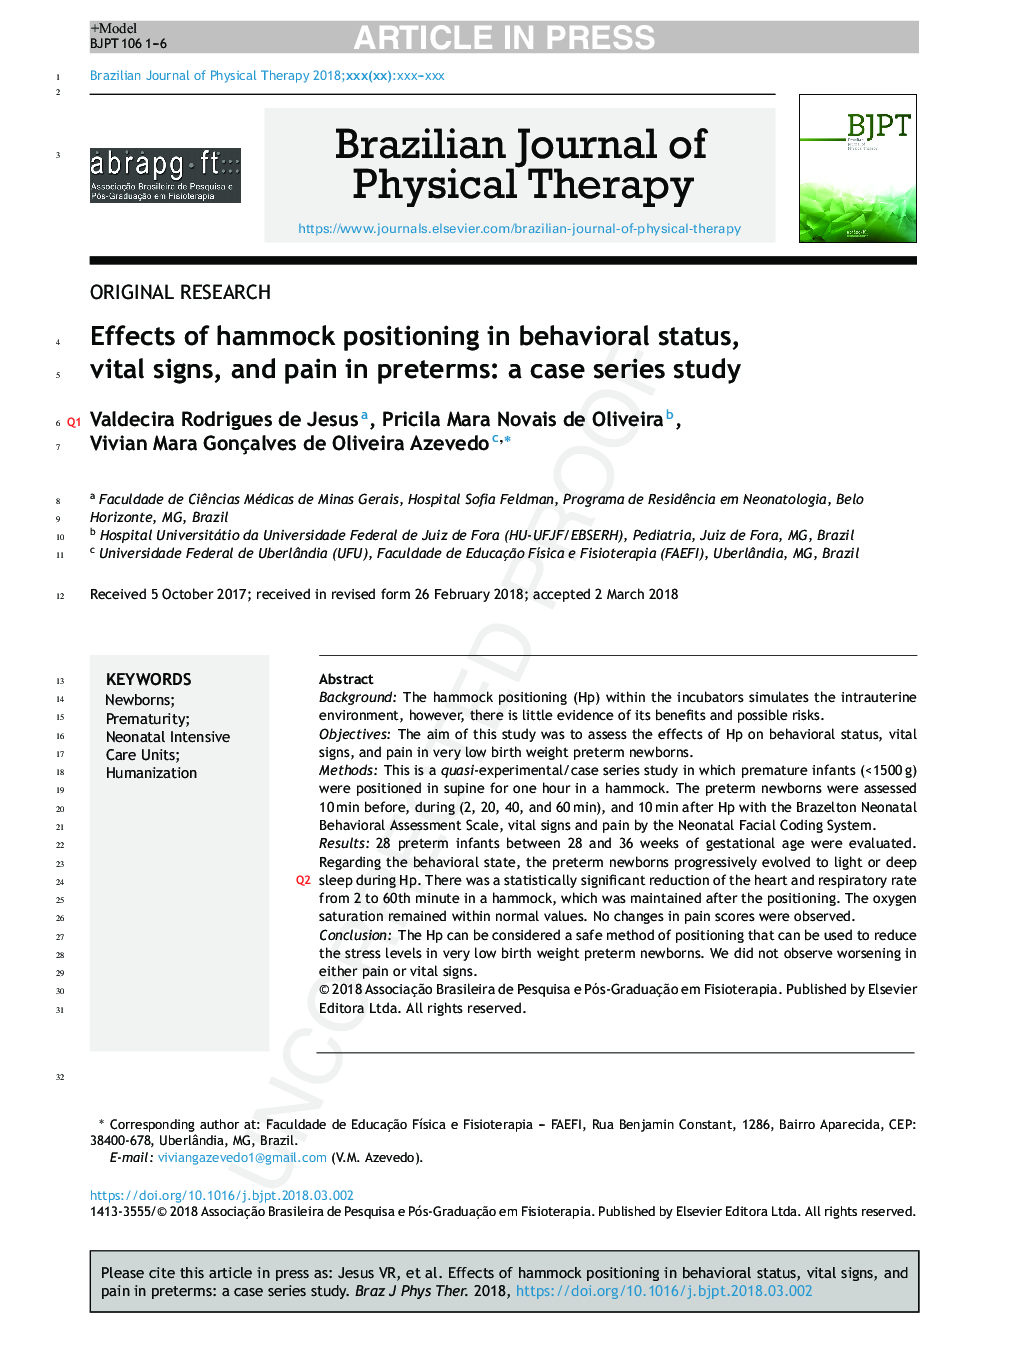 Effects of hammock positioning in behavioral status, vital signs, and pain in preterms: a case series study